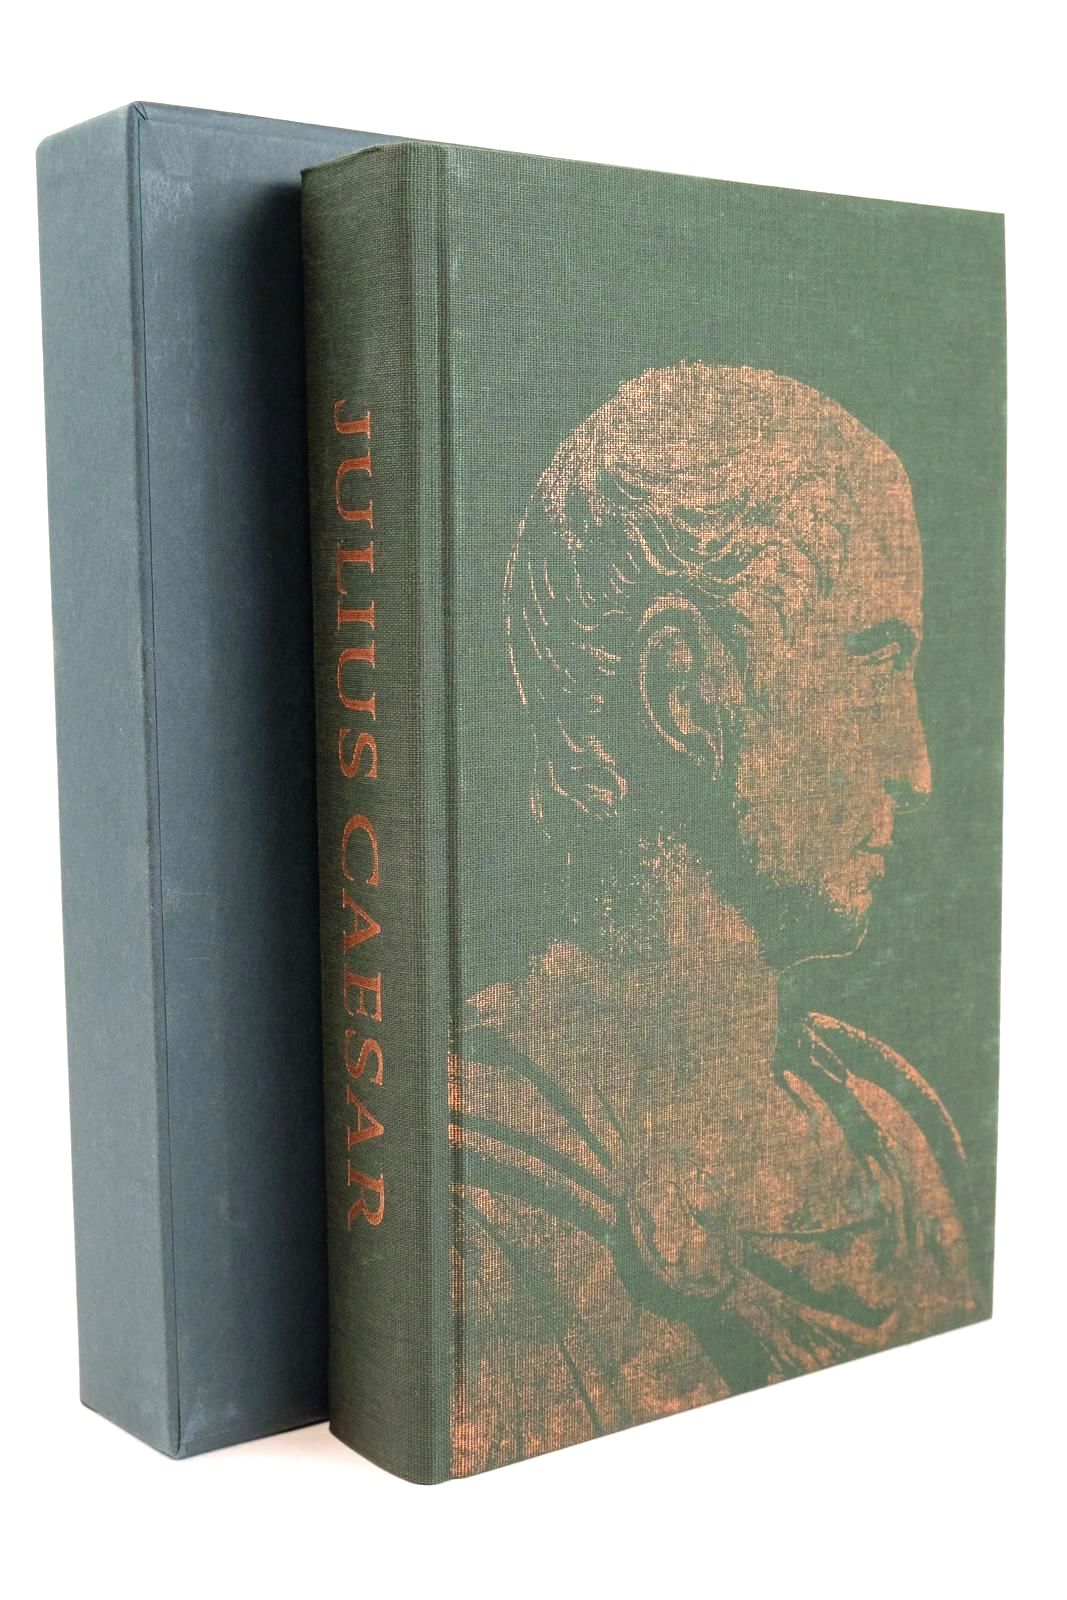 Photo of JULIUS CAESAR written by Meier, Christian Jones, Peter published by Folio Society (STOCK CODE: 1326852)  for sale by Stella & Rose's Books